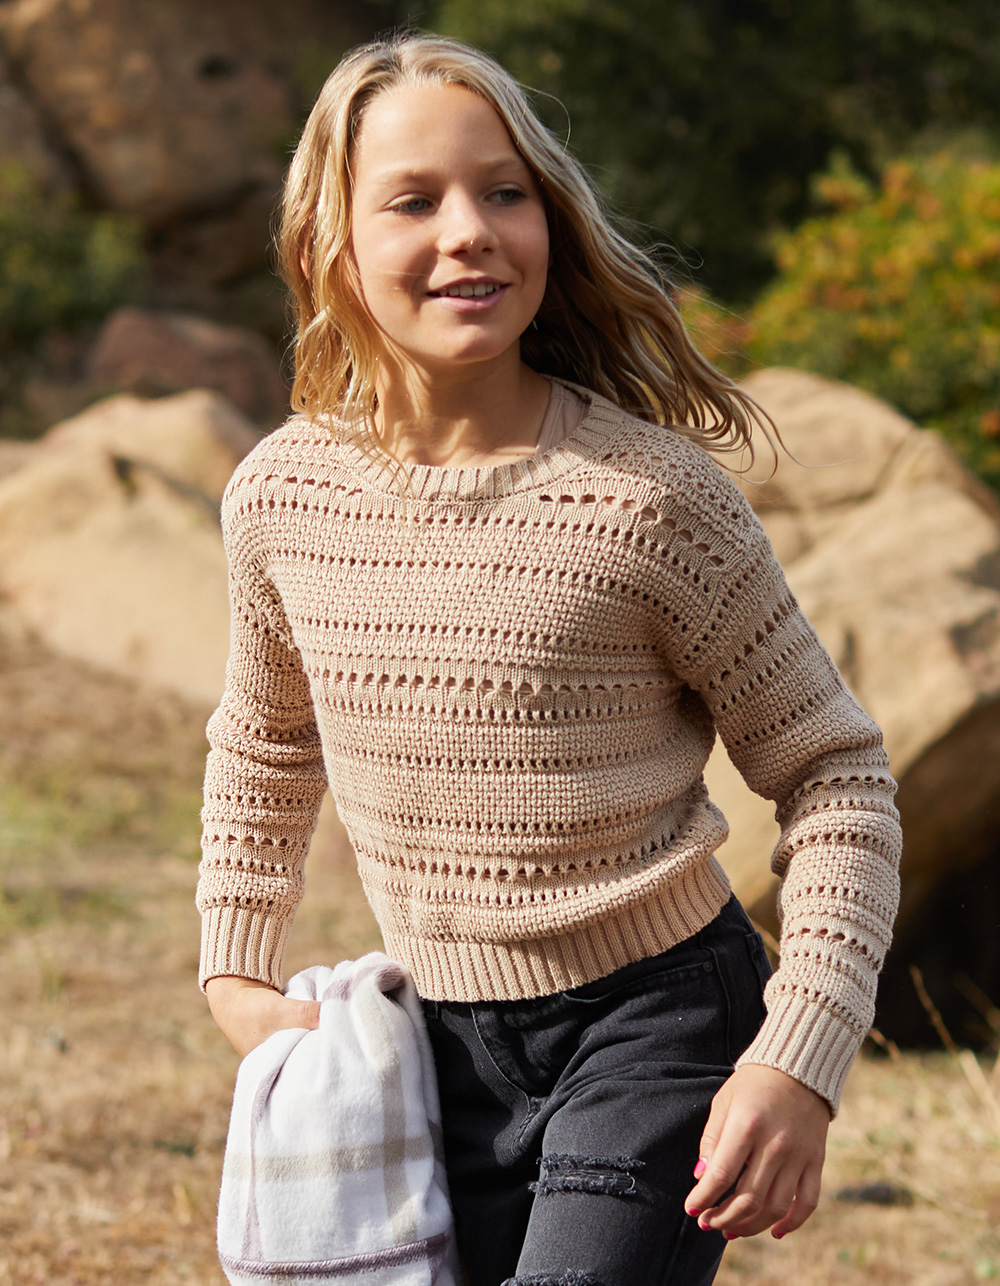 RSQ Girls Solid Open Weave Sweater